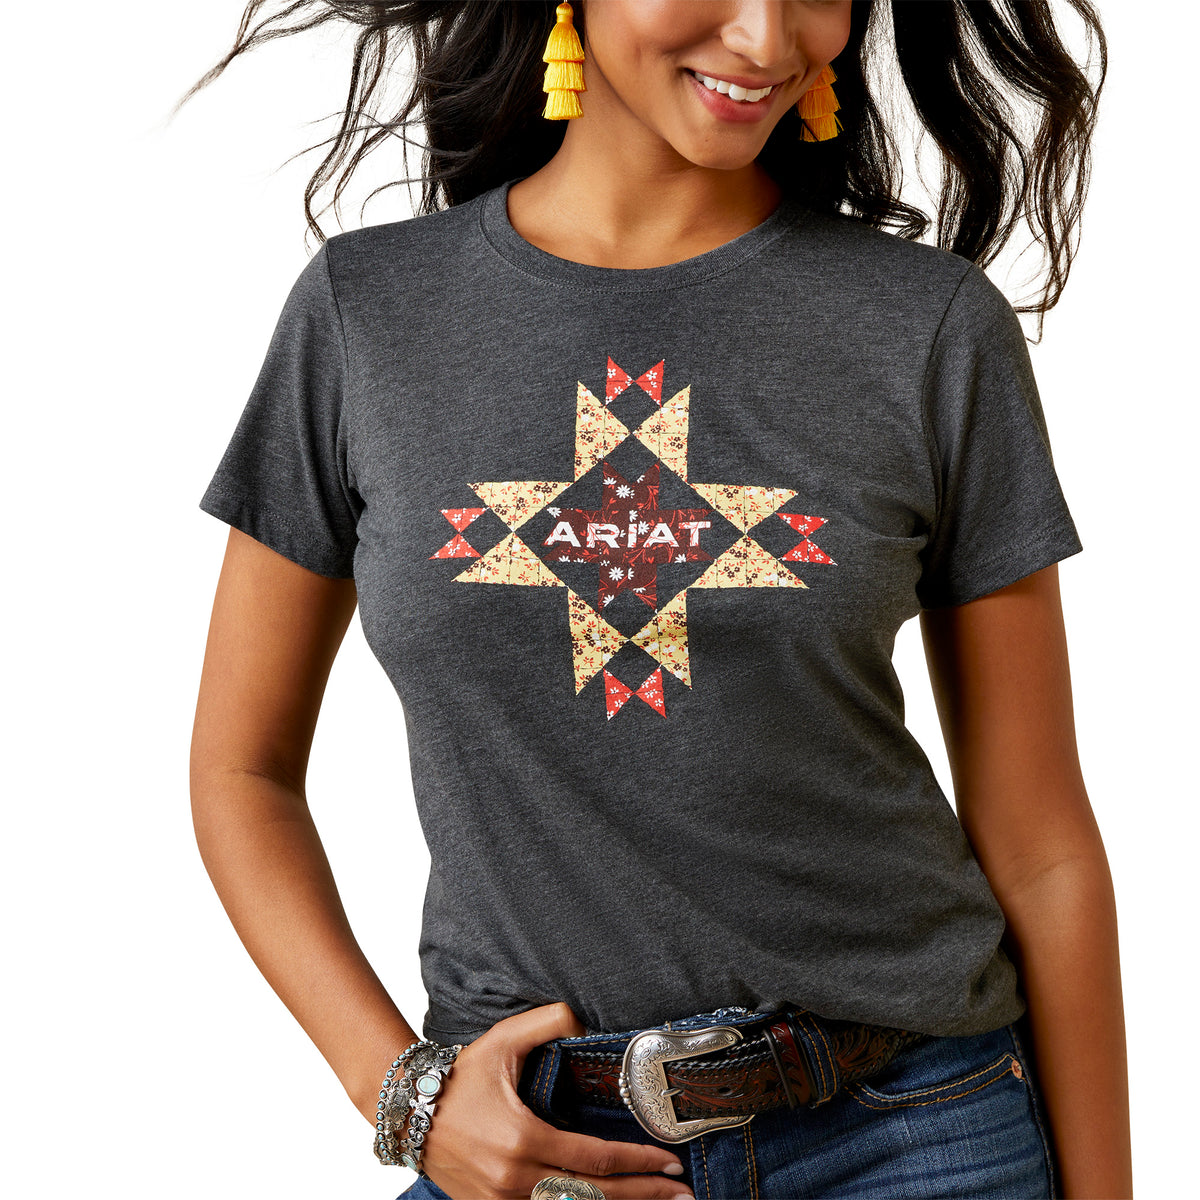 Ariat Womens Quilt Logo Tee - Charcoal Heather